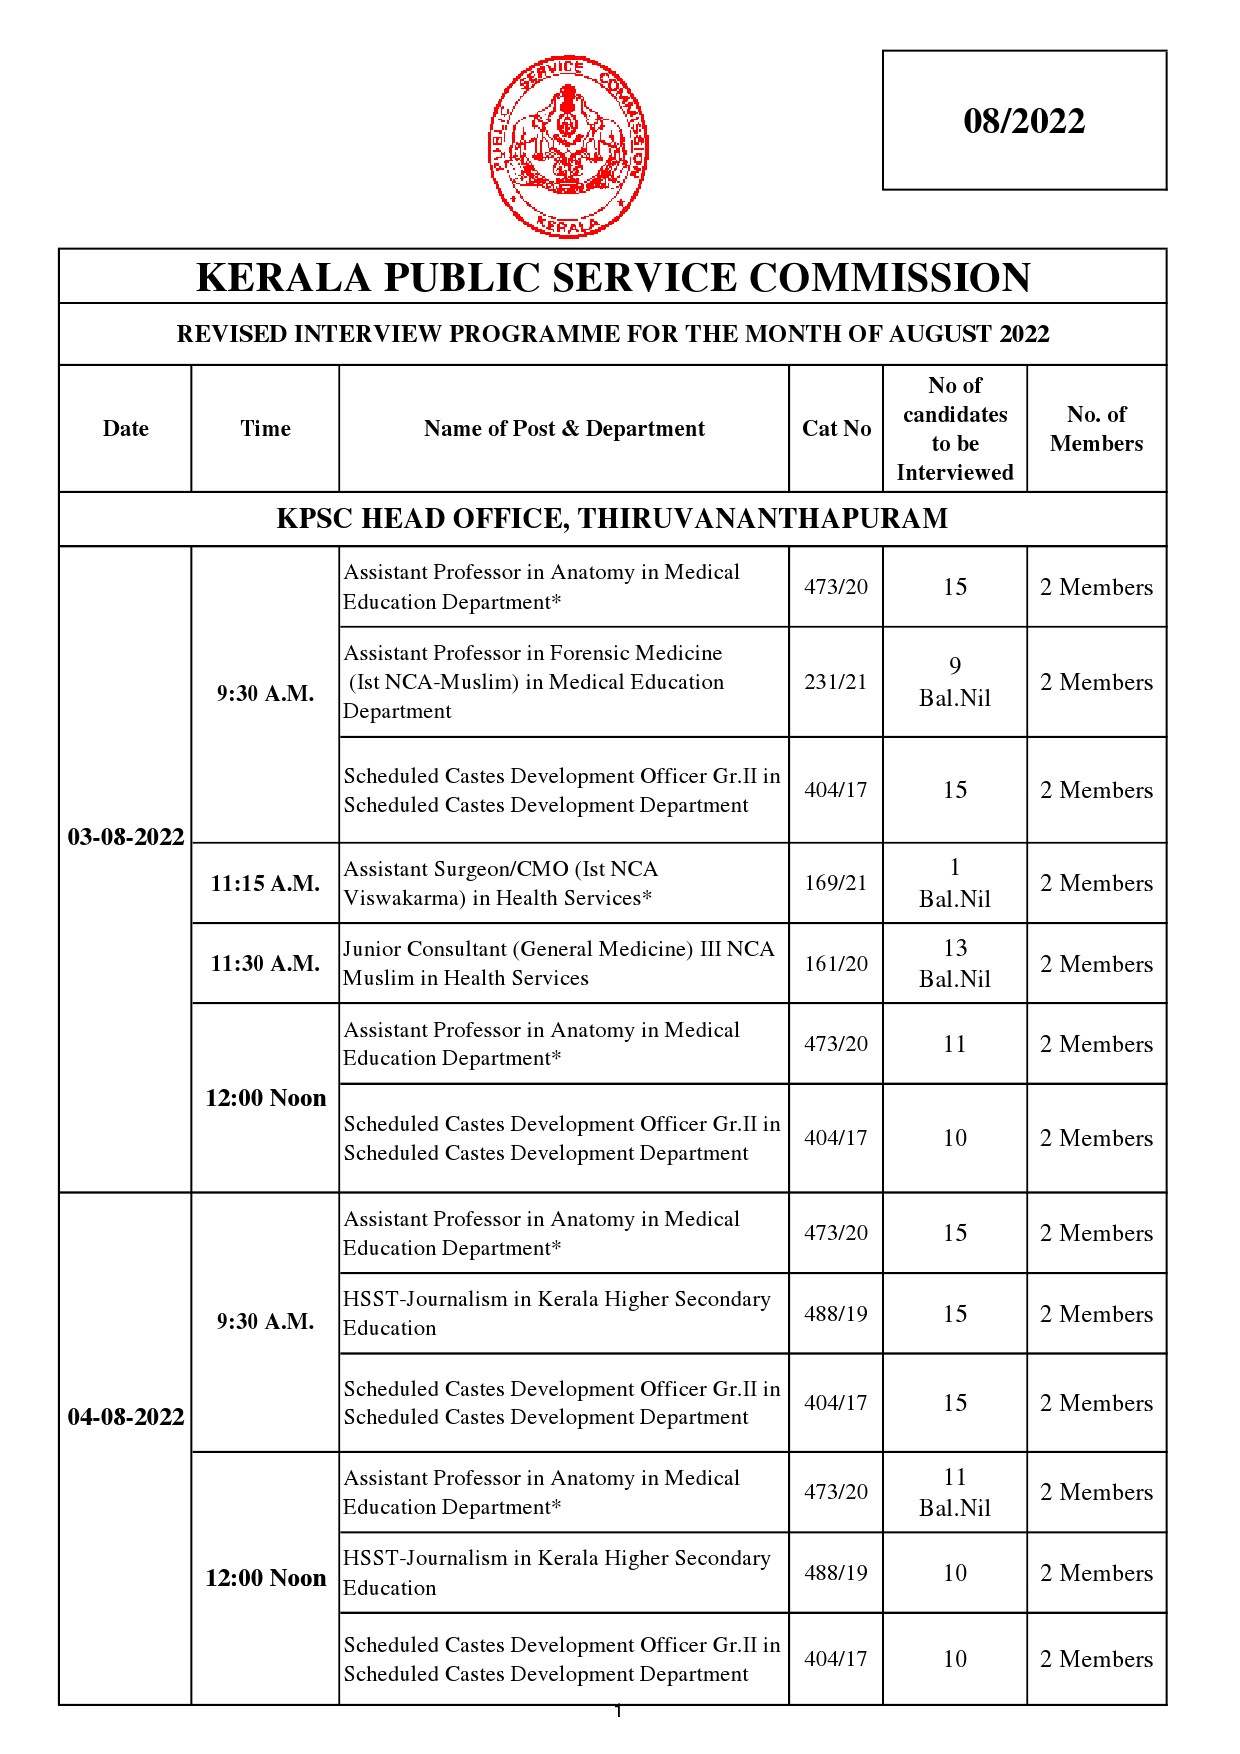 Revised Interview Programme For The Month Of August 2022 - Notification Image 1